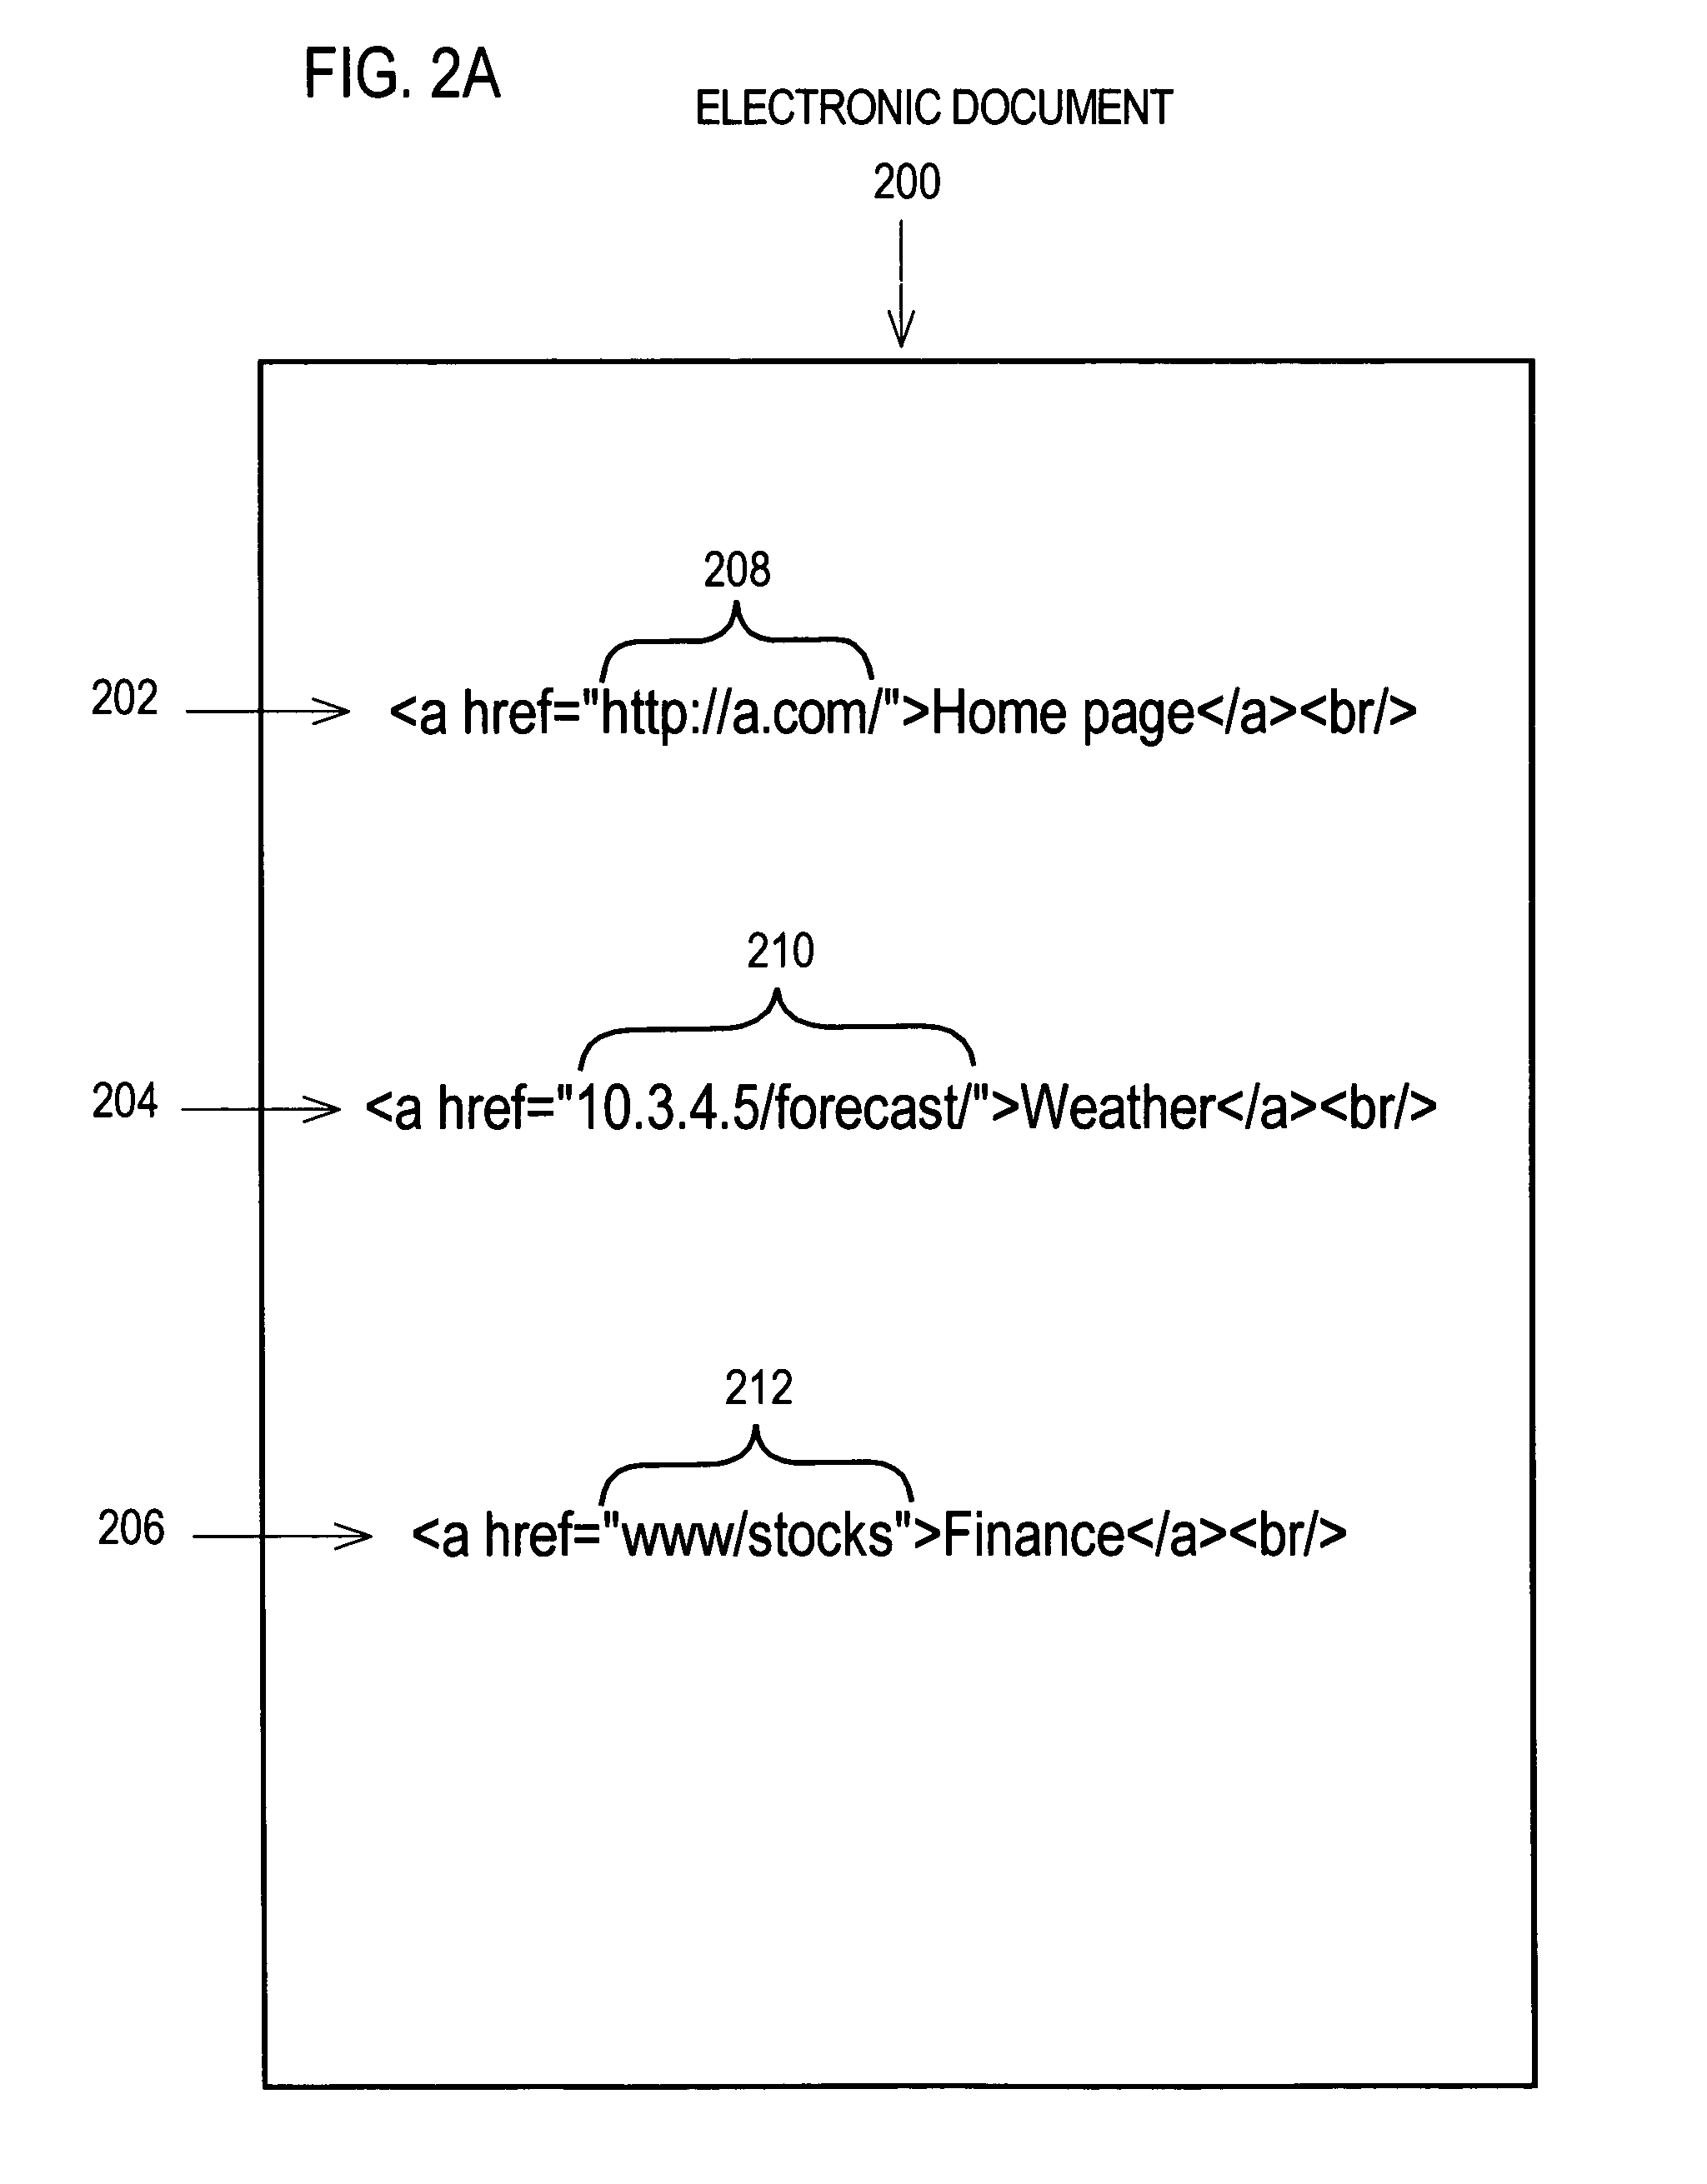 Reverse proxy mechanism for retrieving electronic content associated with a local network